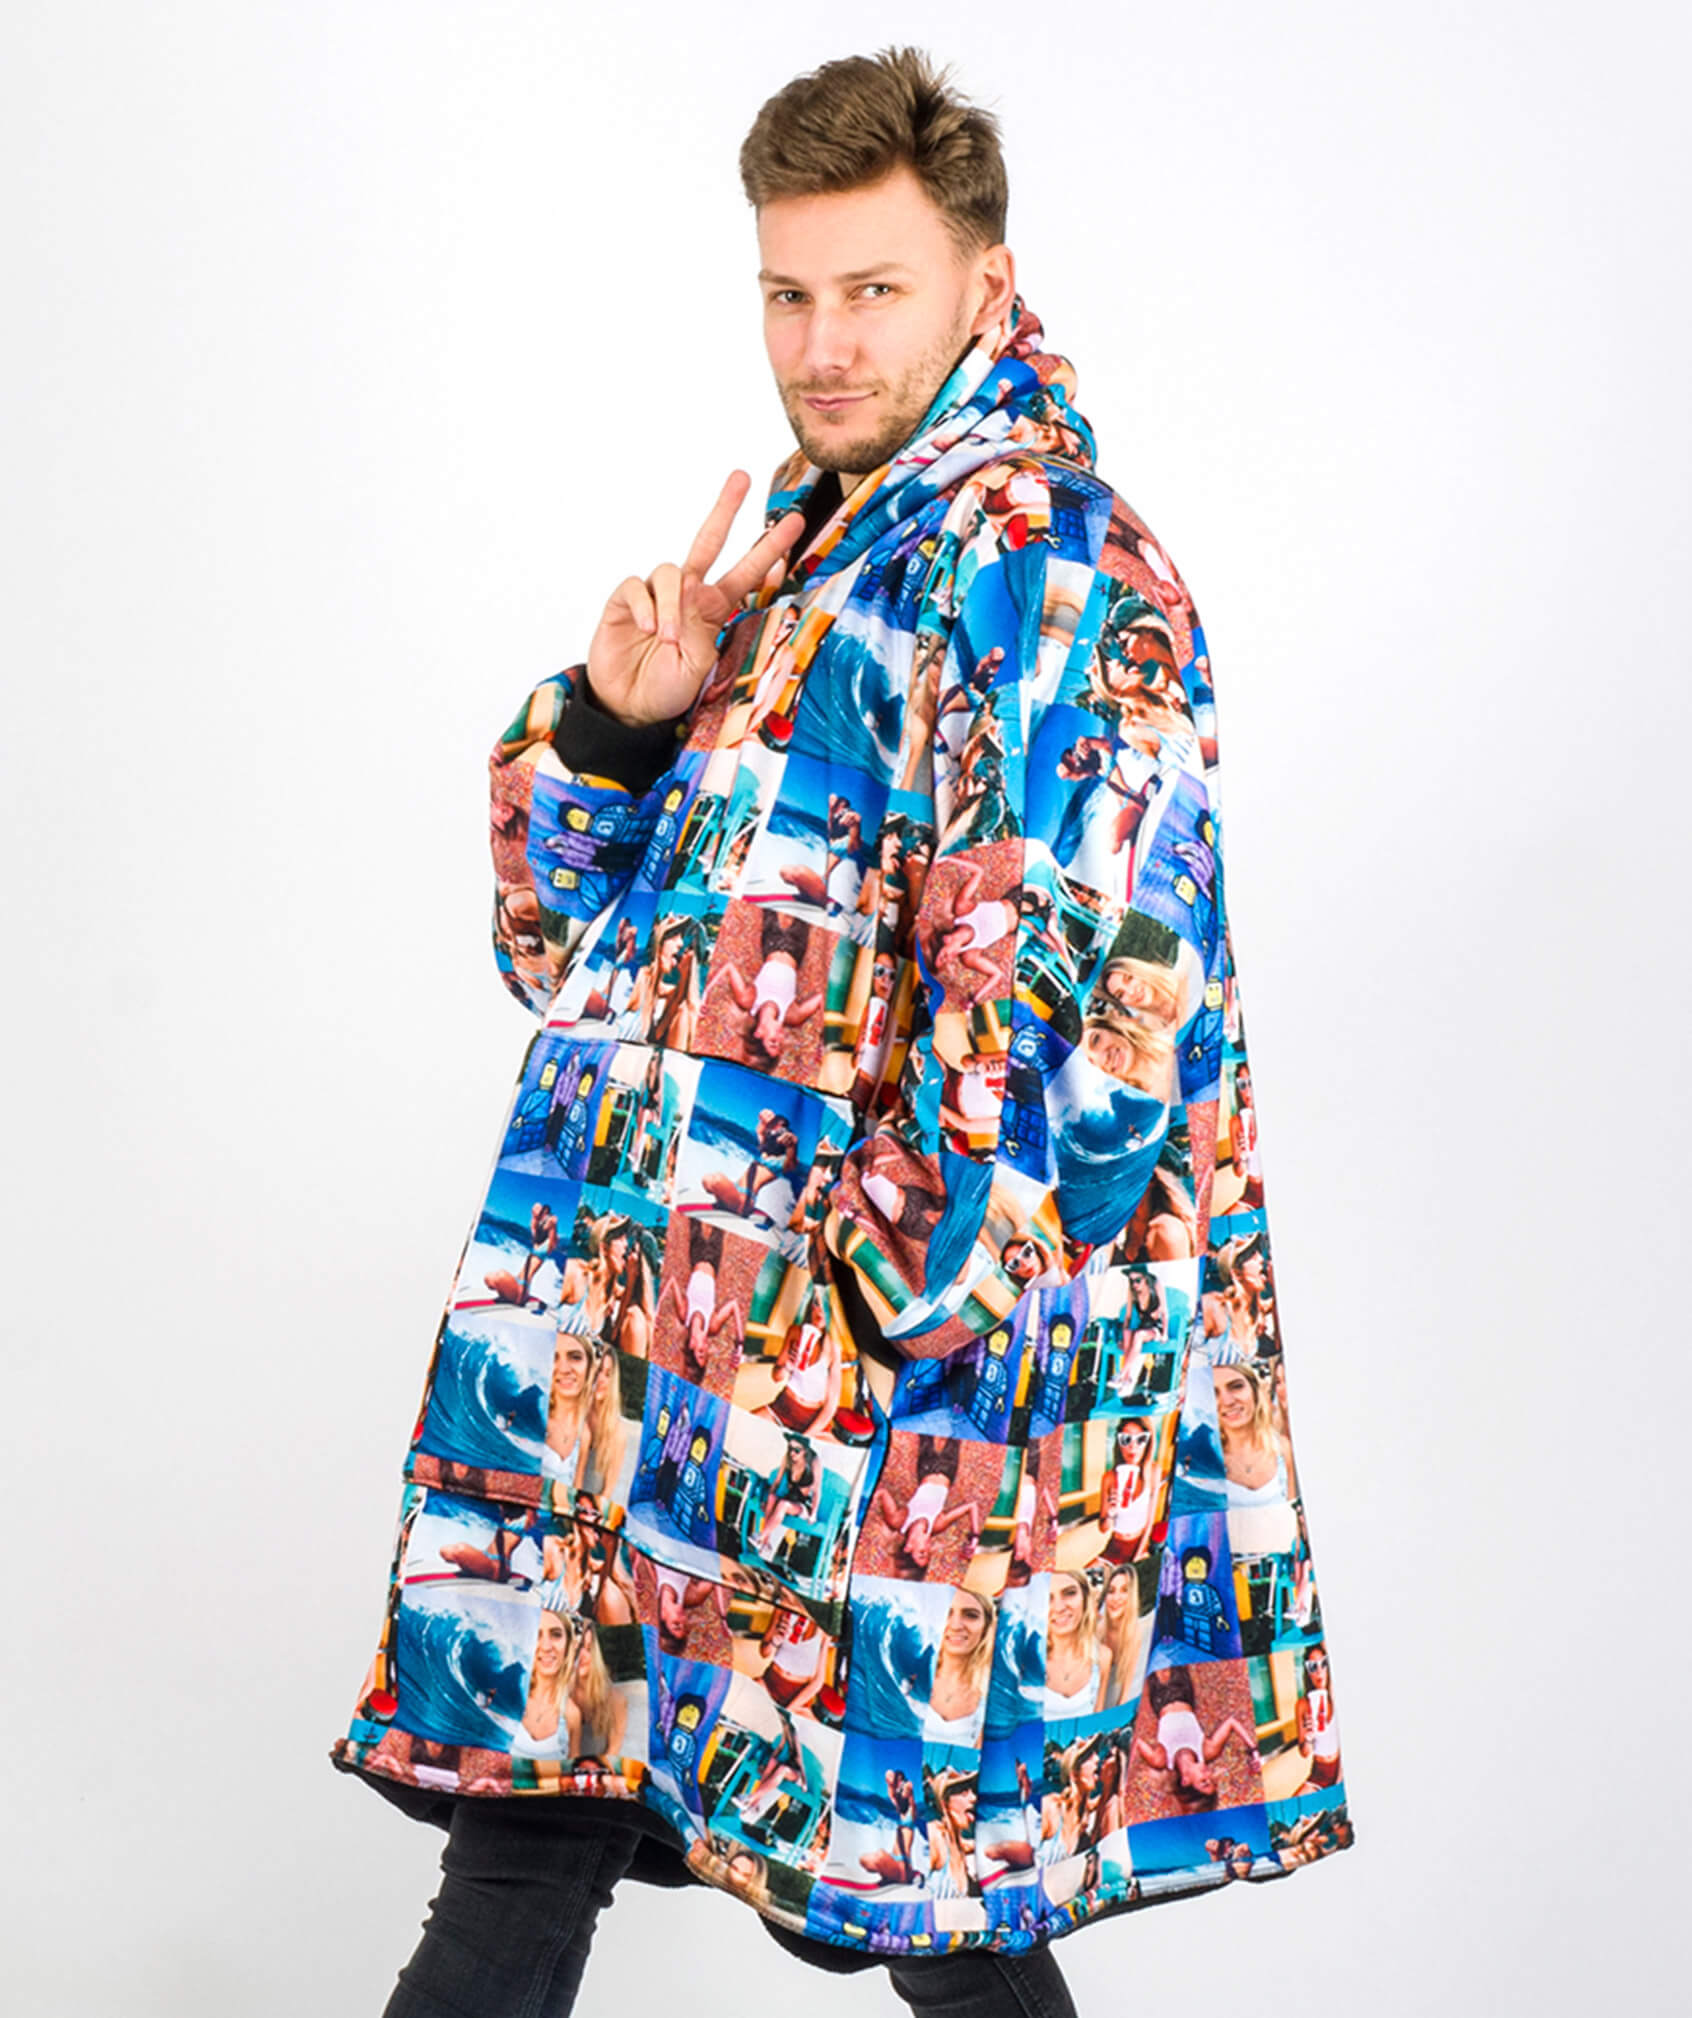 Photo Collage Chillzy Hoodie Blanket